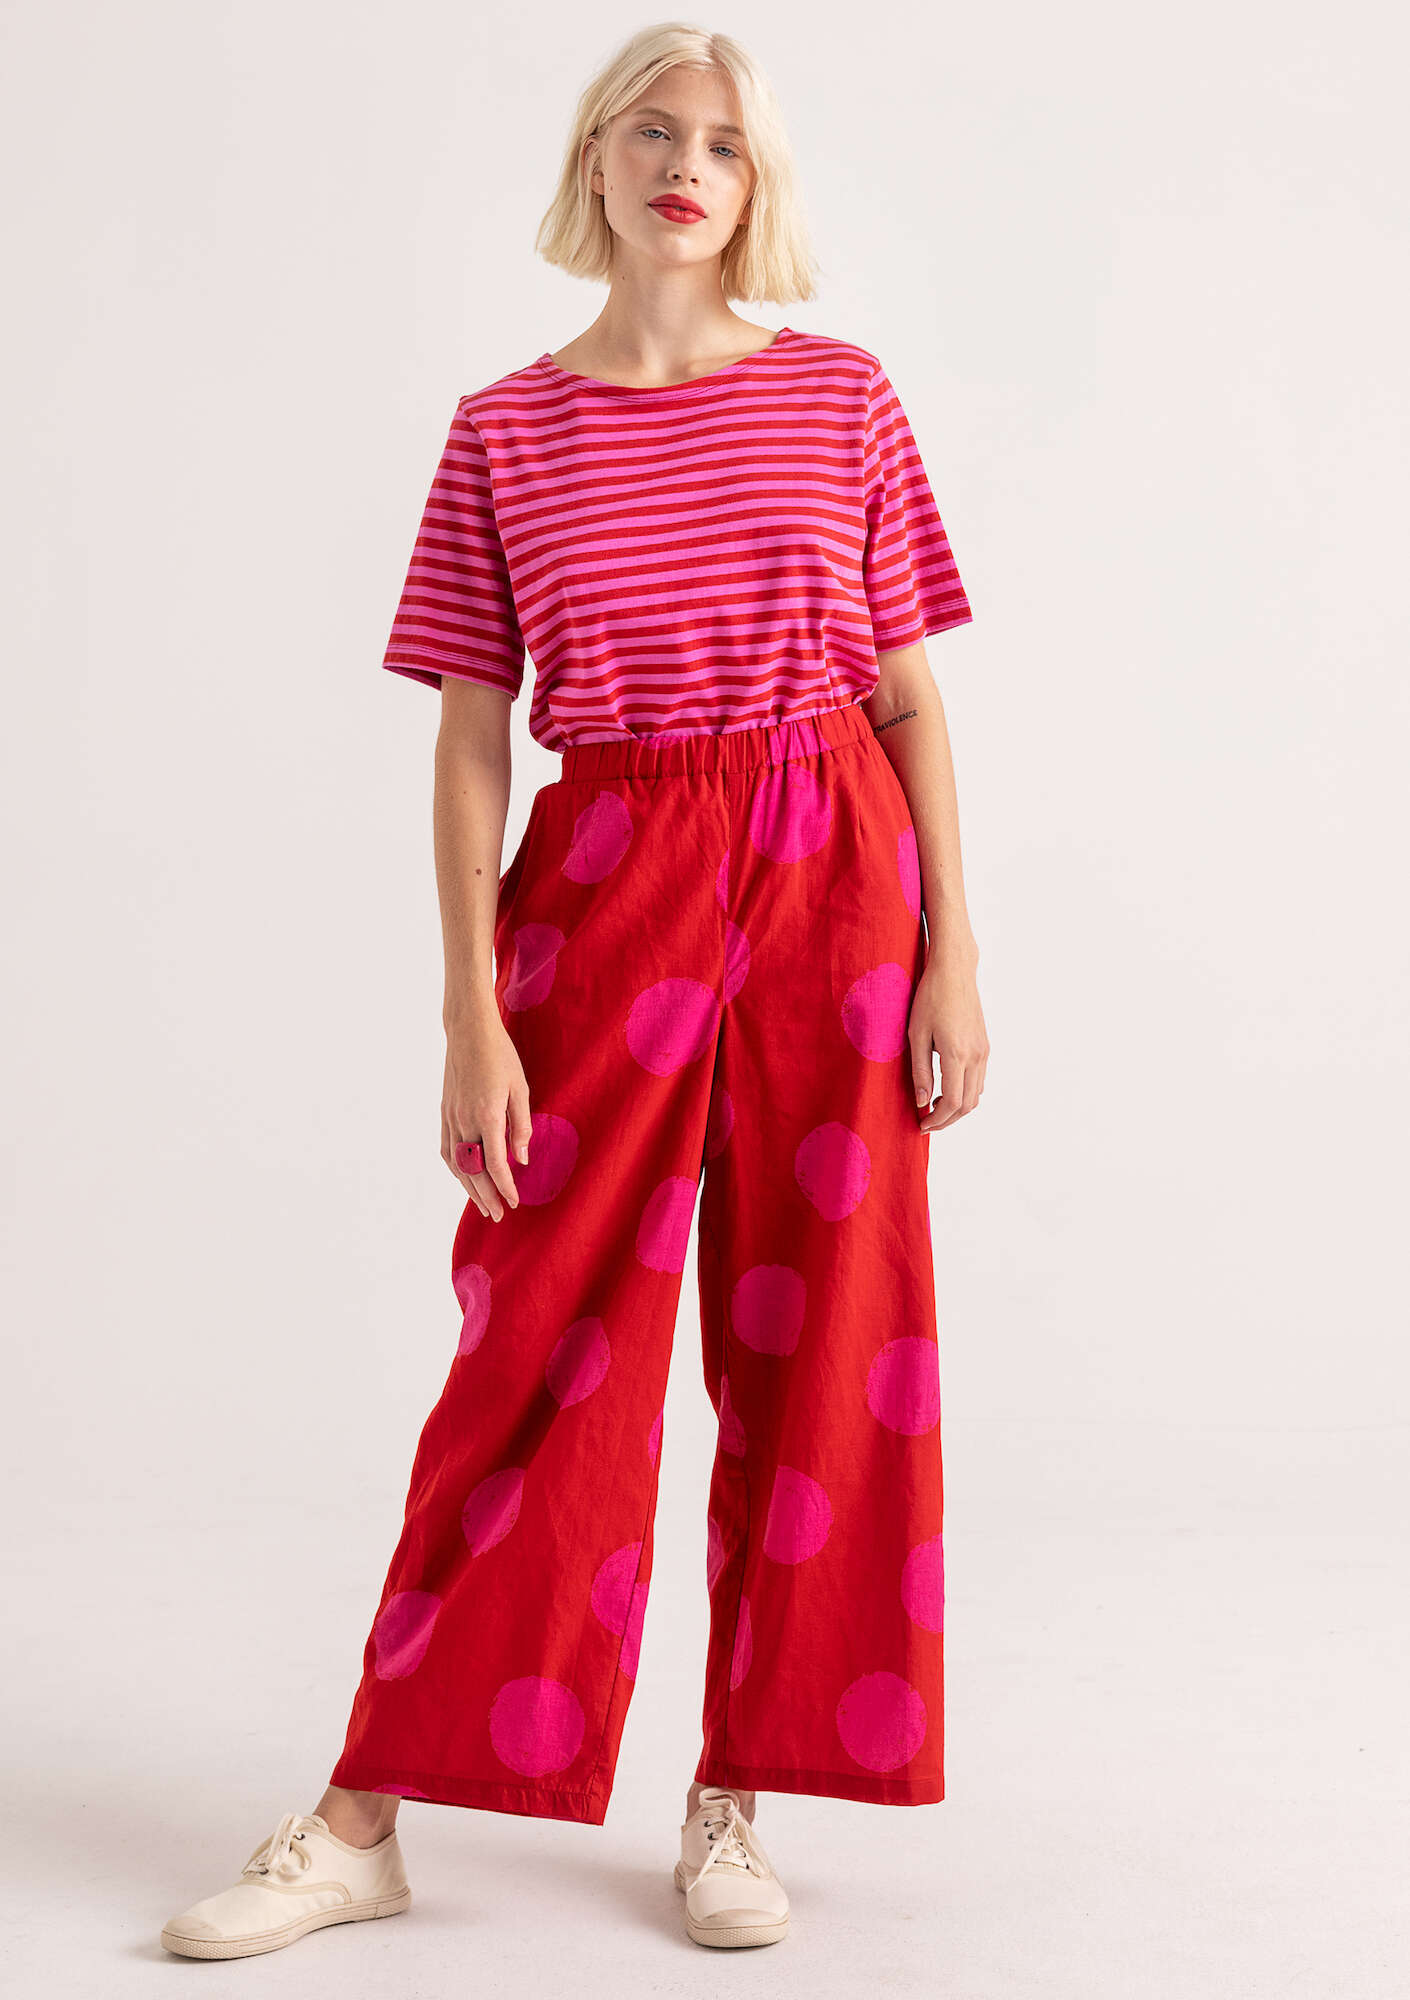 Palette trousers parrot red/patterned